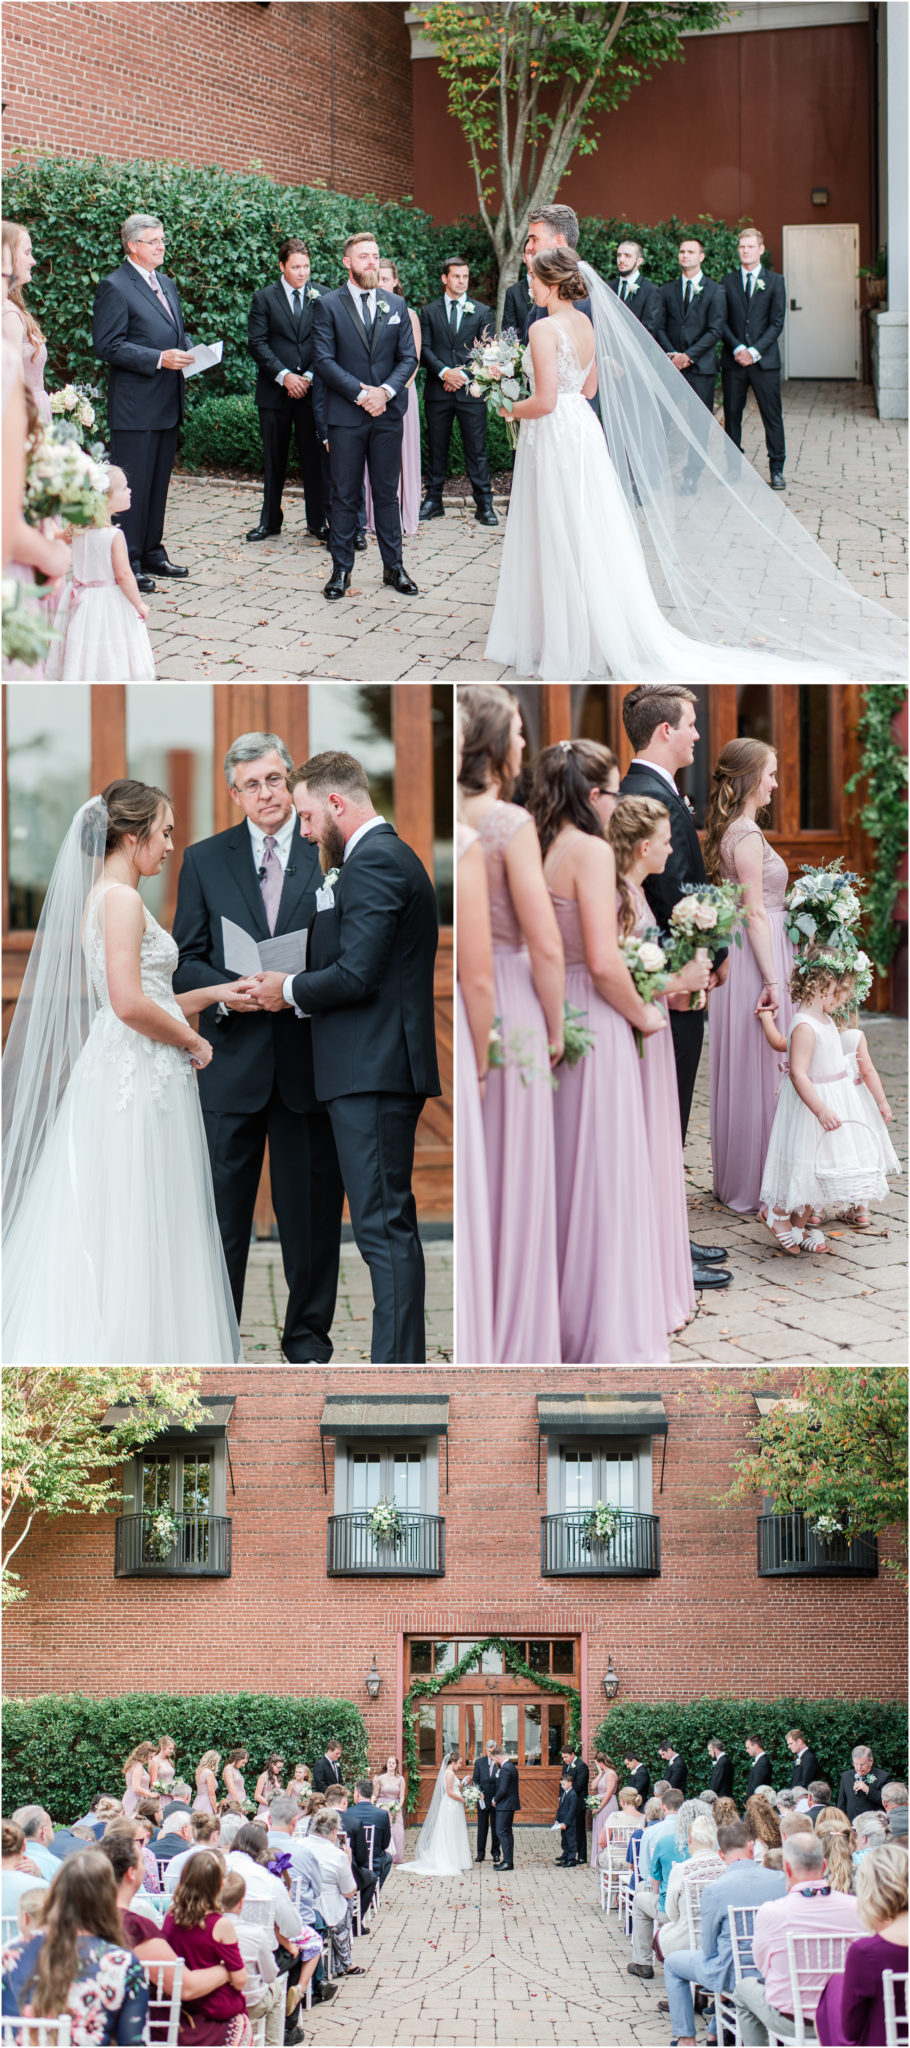 Elegant Carriage House Wedding at the Bleckley Inn Ceremony